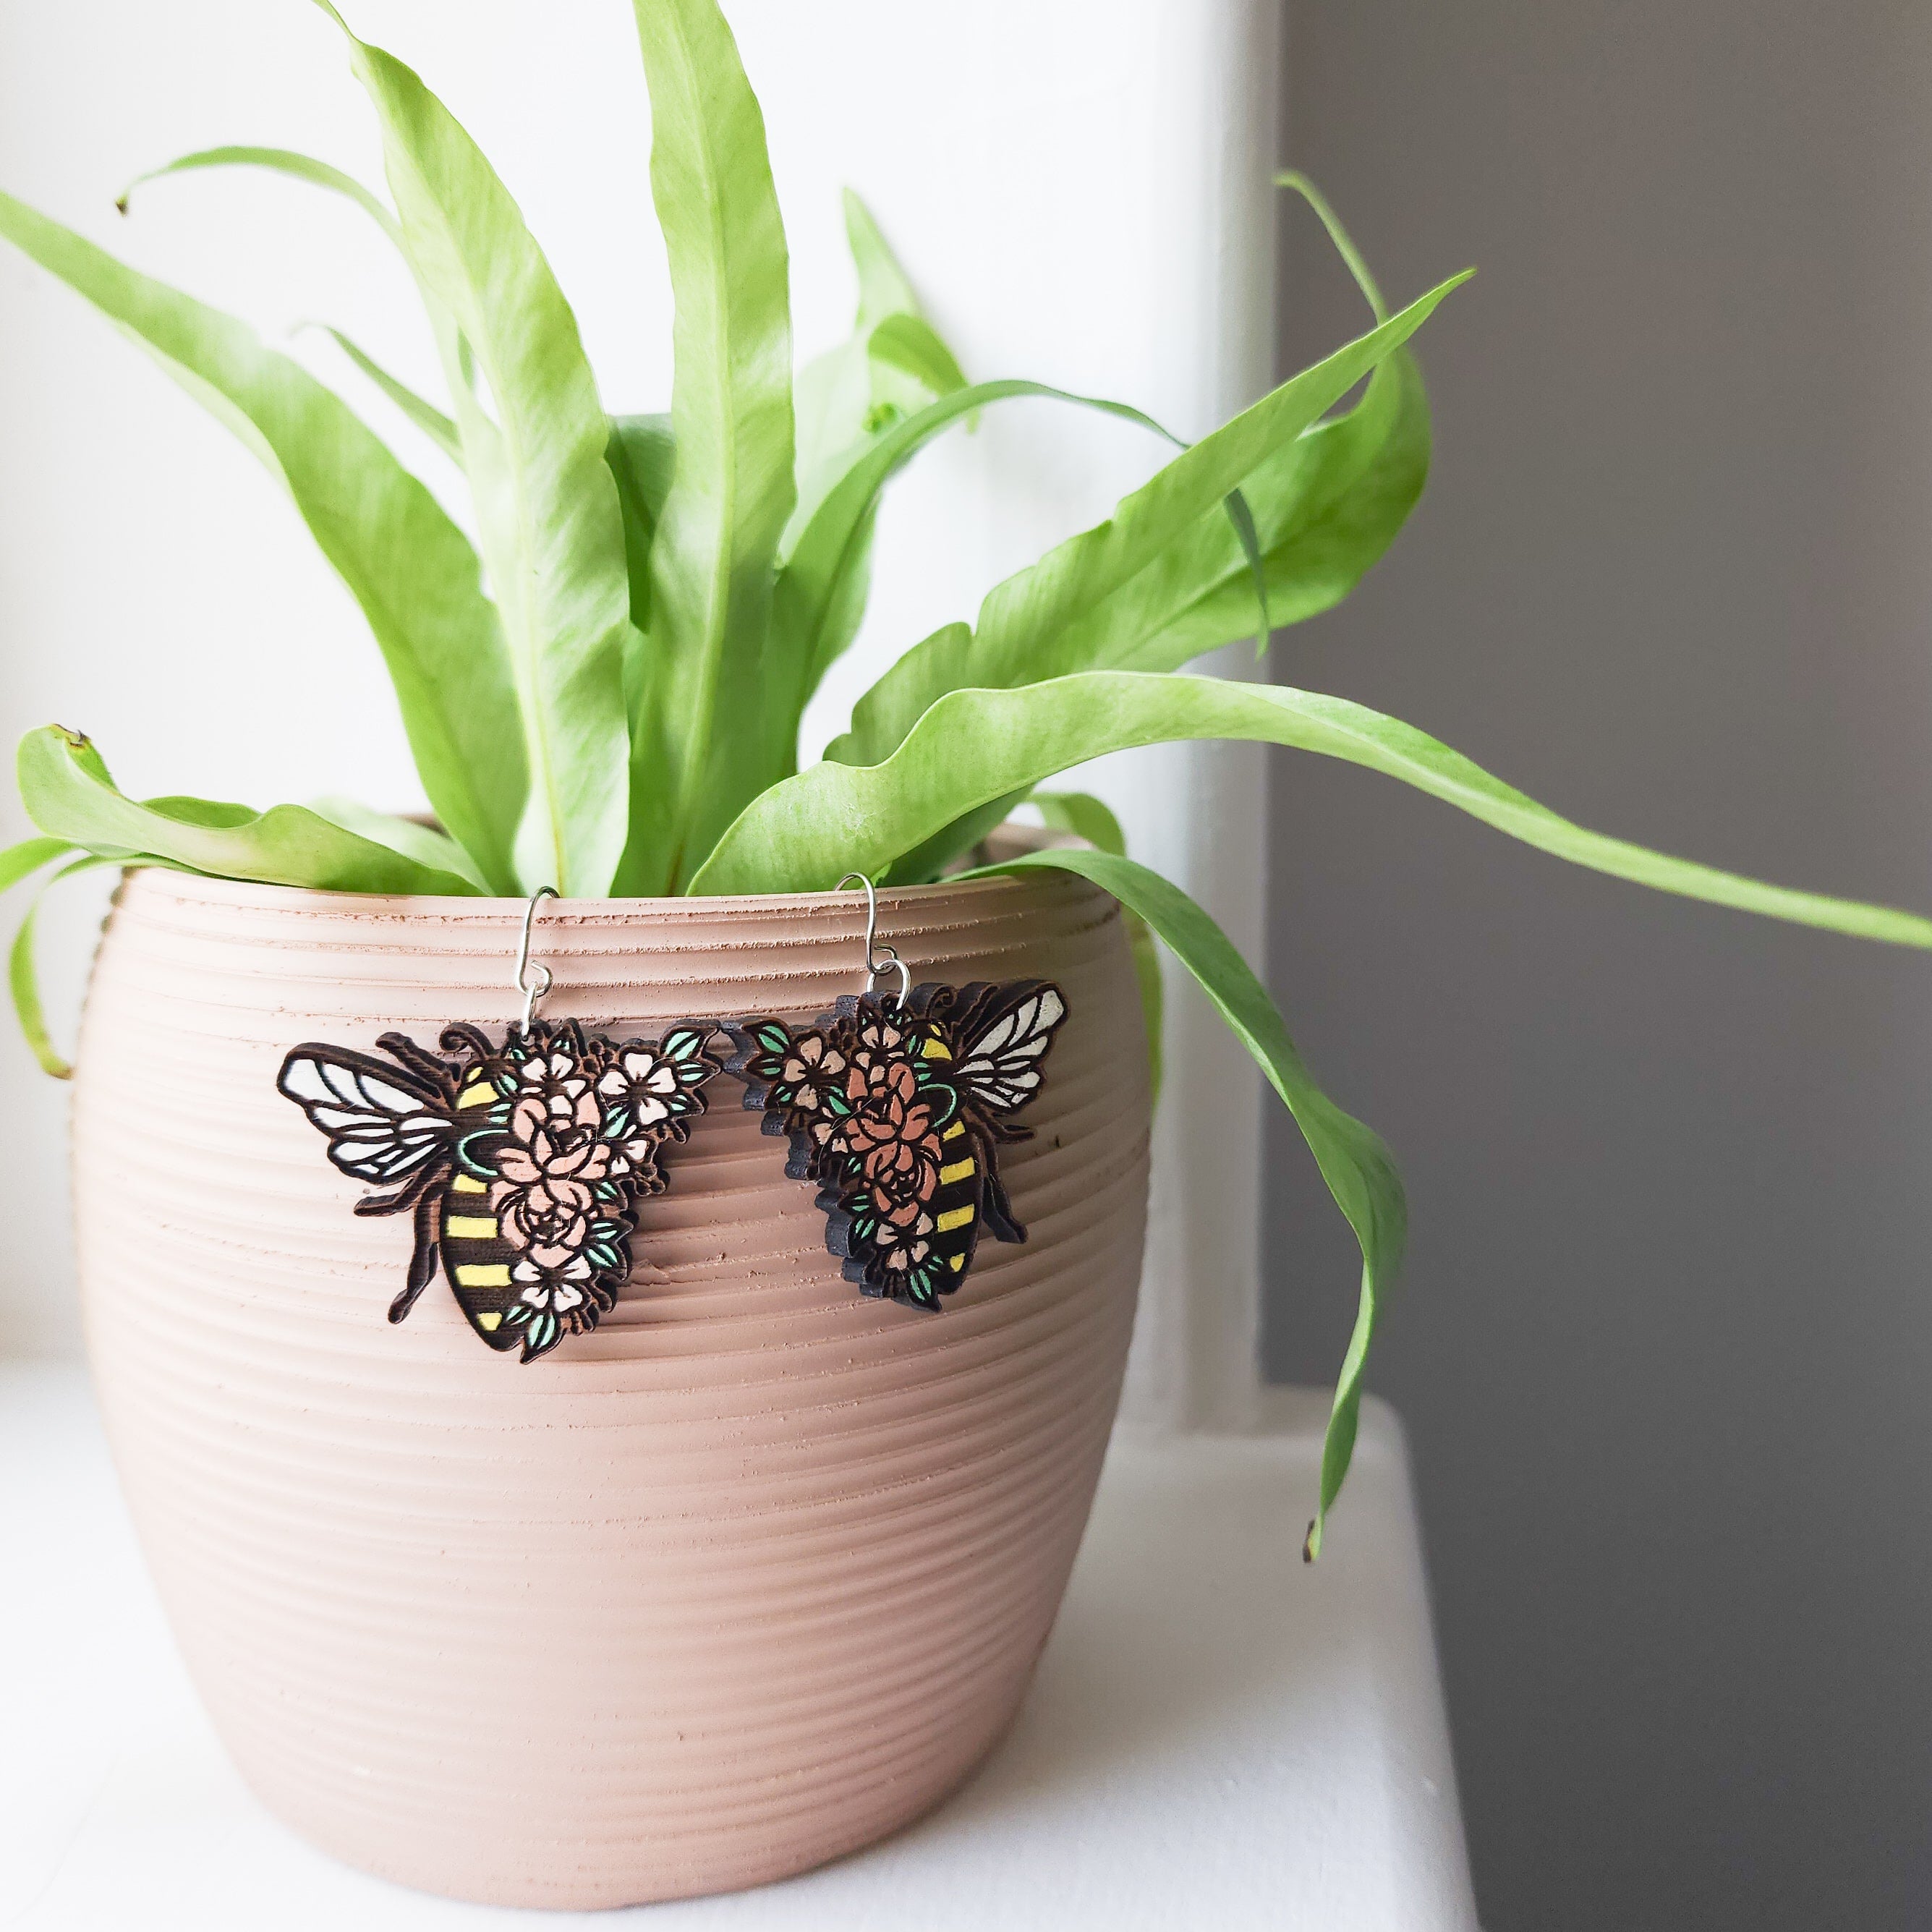 floral bee earrings hanging off a plant pot